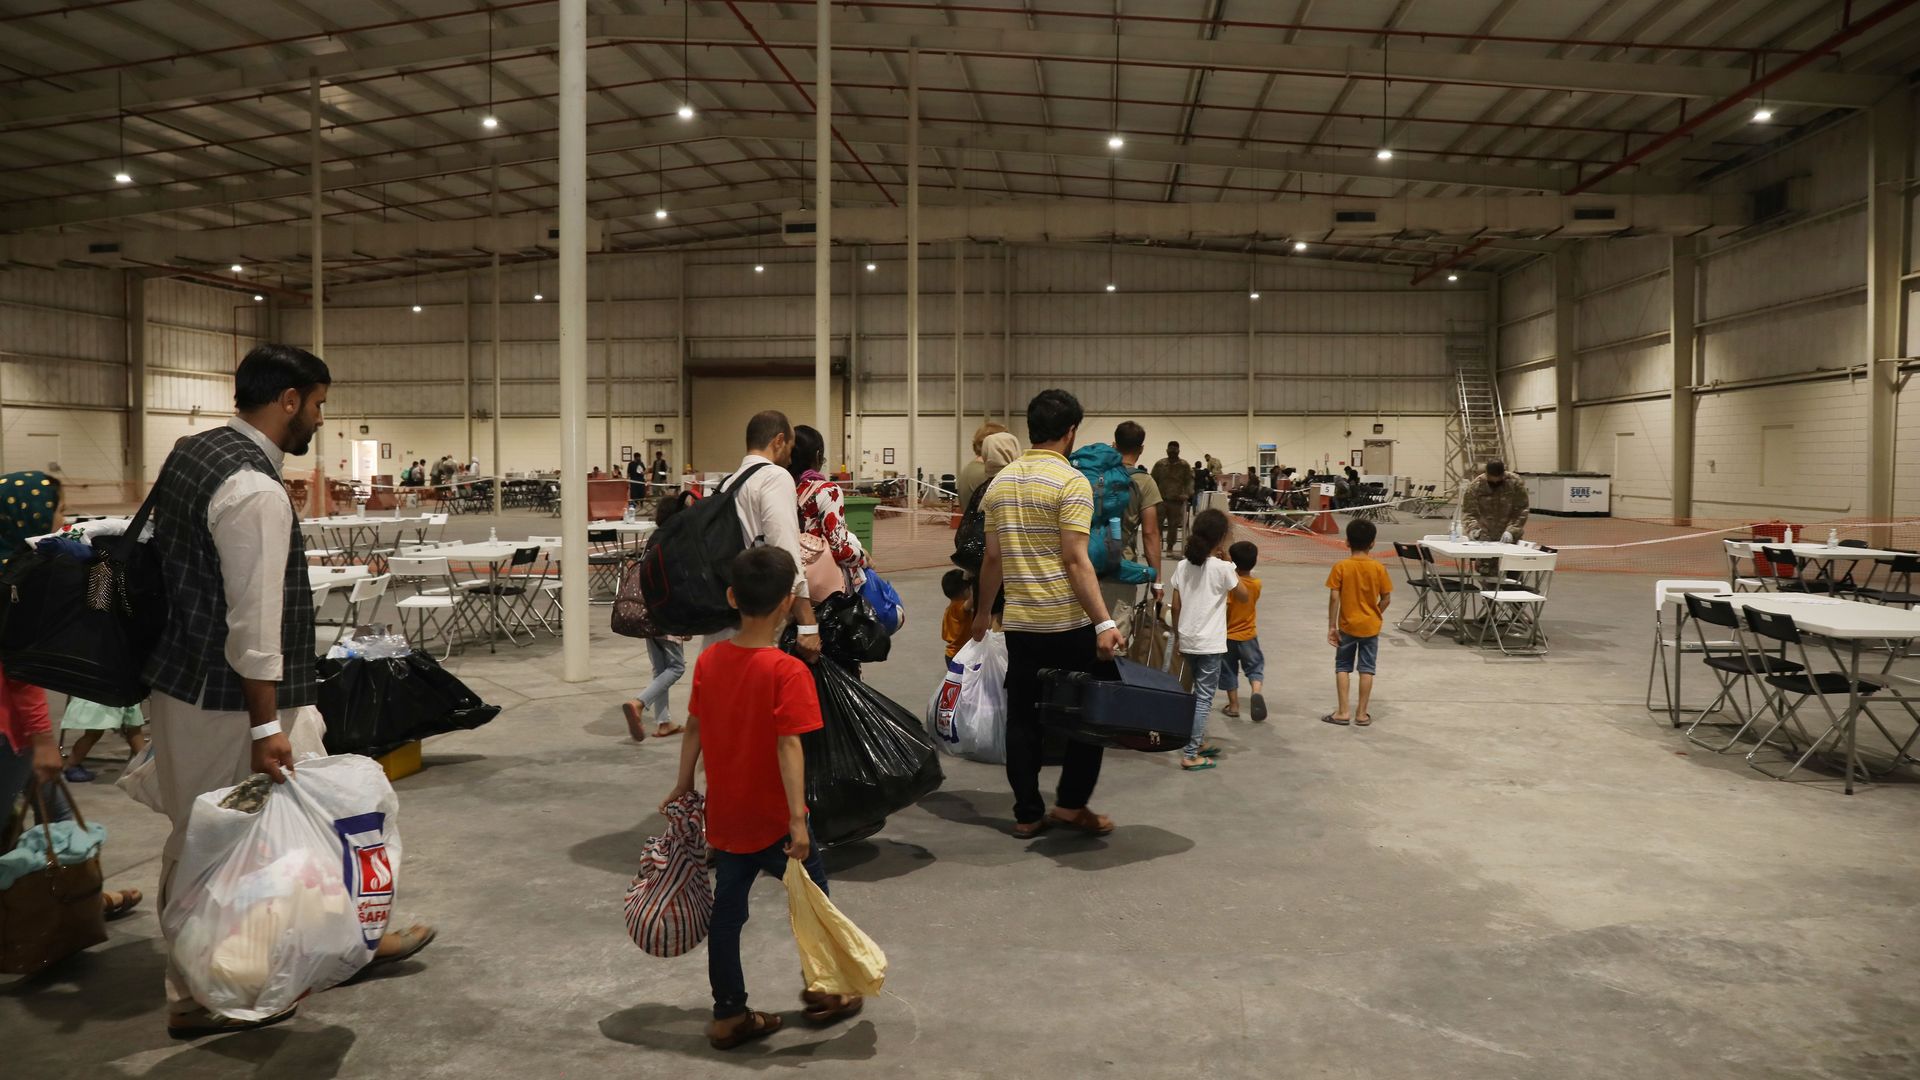 Afghan refugees are seen walking through a processing center in Qatar.